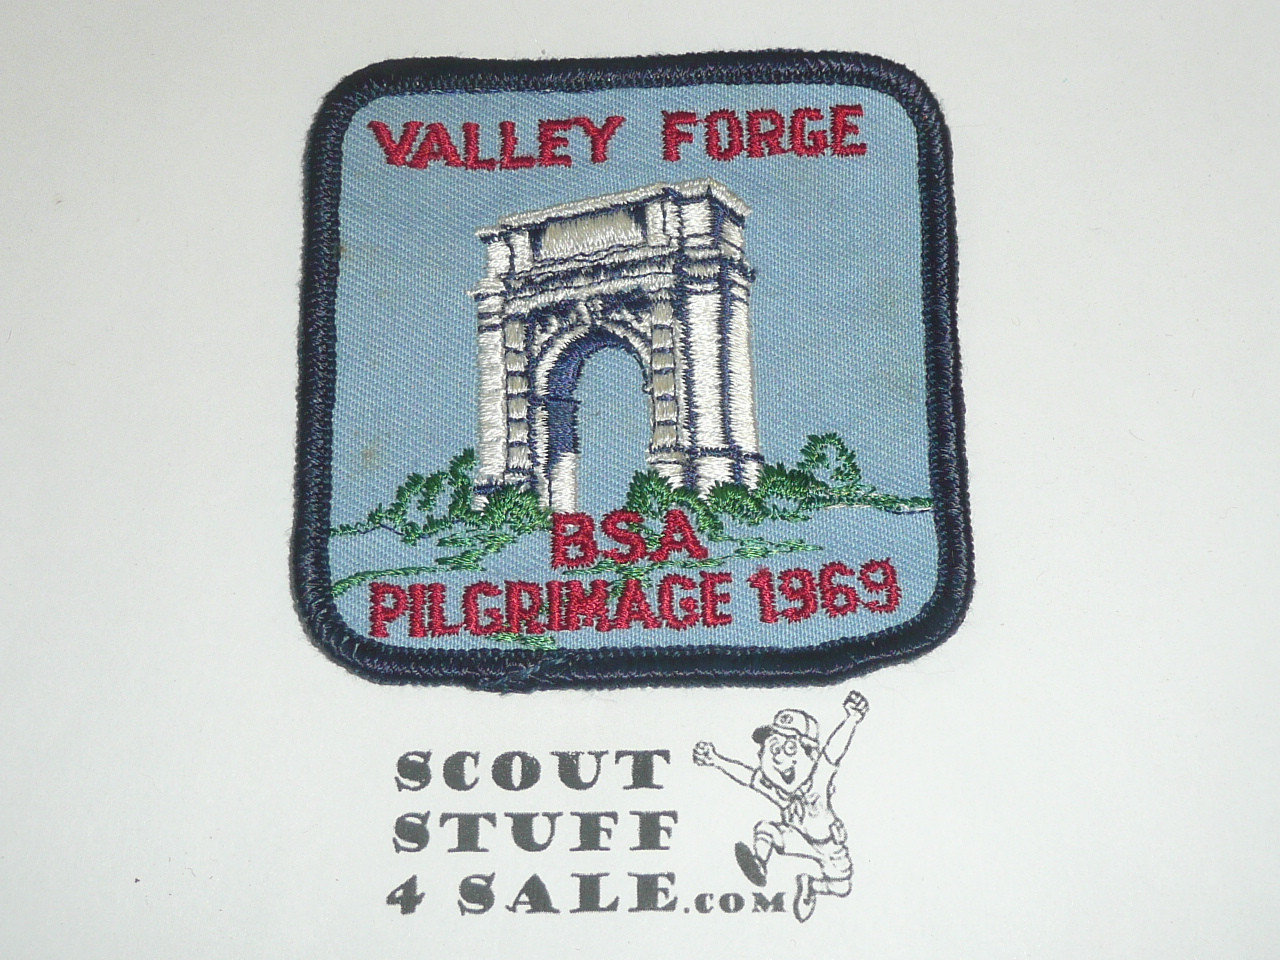 Valley Forge Council Pilgrimage, 1969